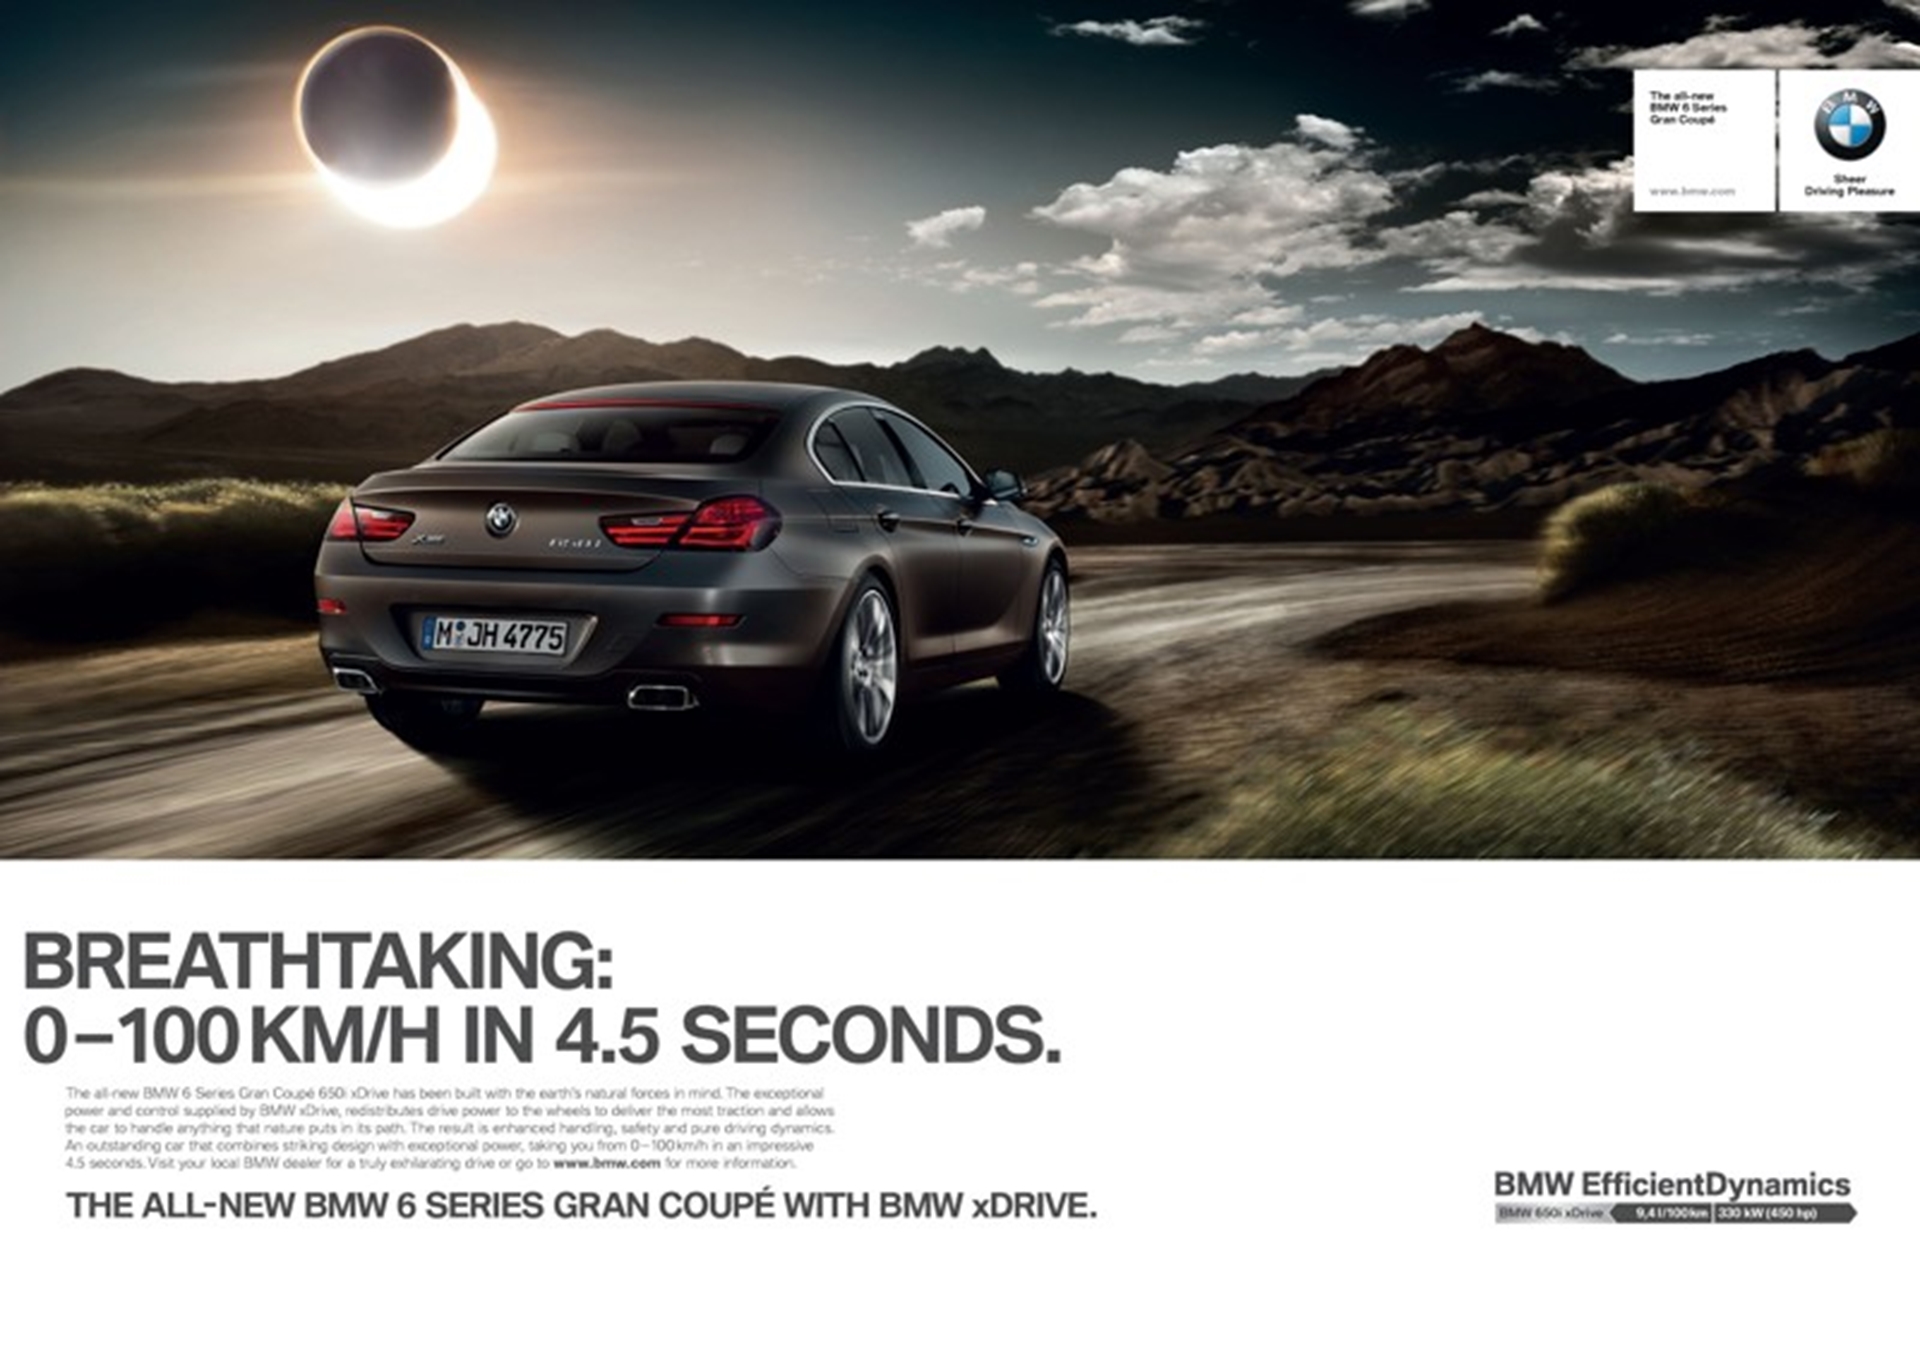 Campaign launch for new BMW 6 Series Gran Coupé